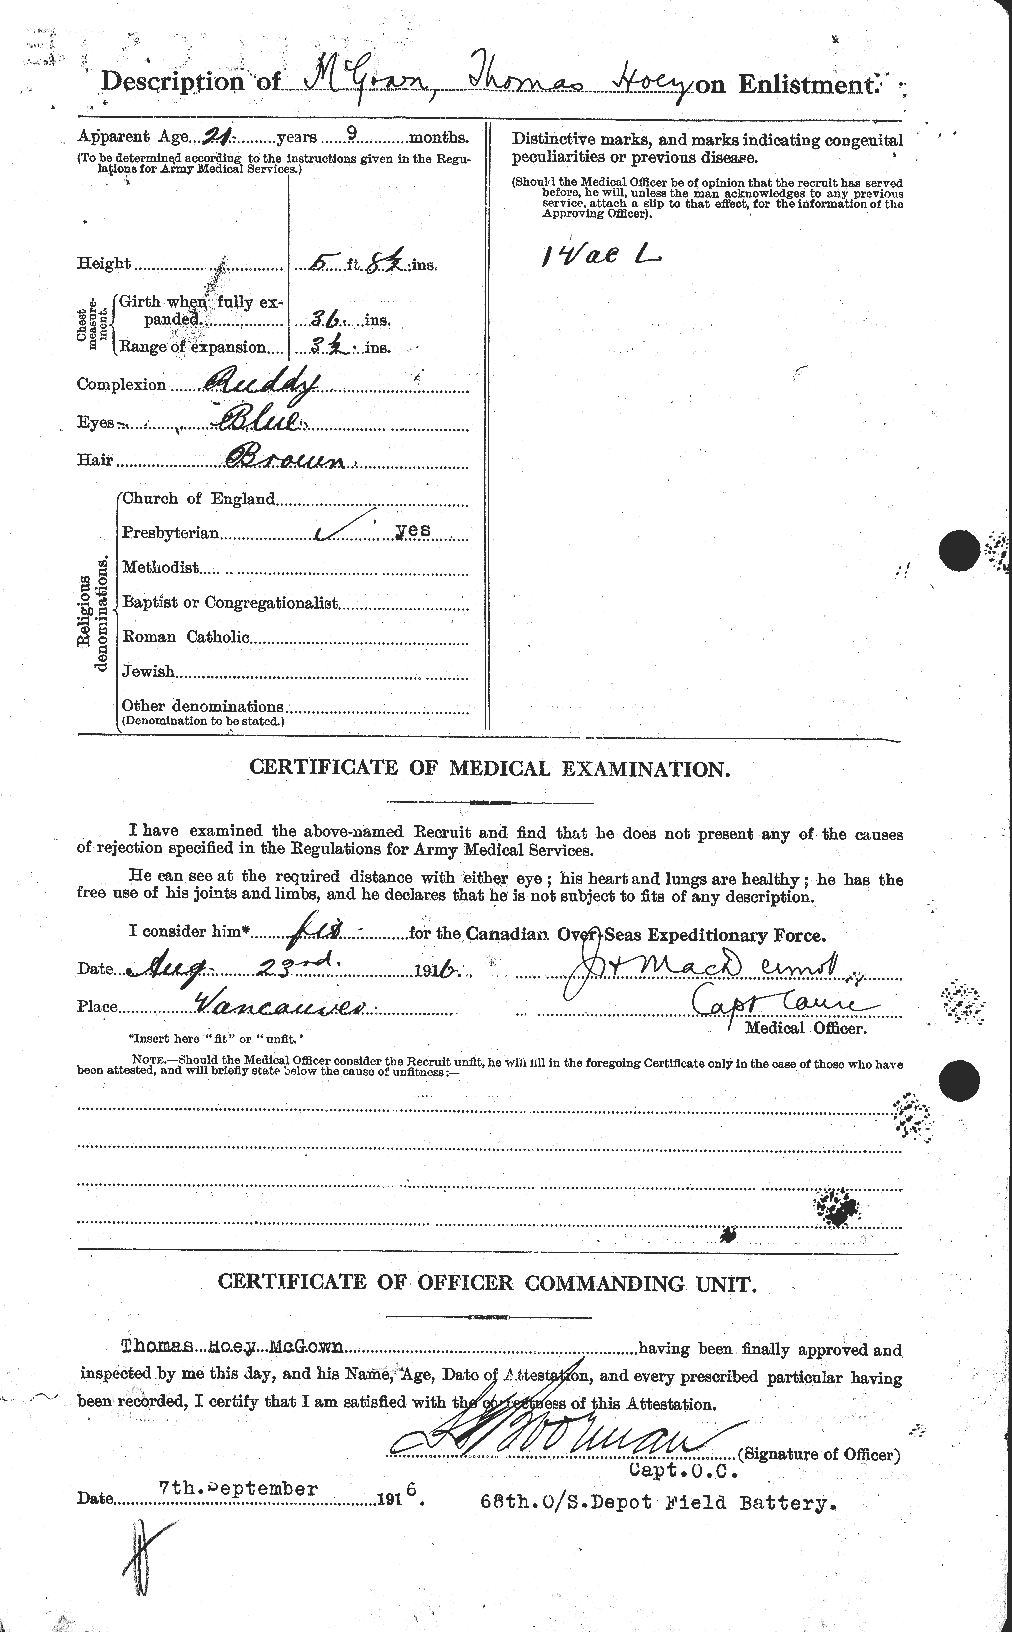 Personnel Records of the First World War - CEF 523258b